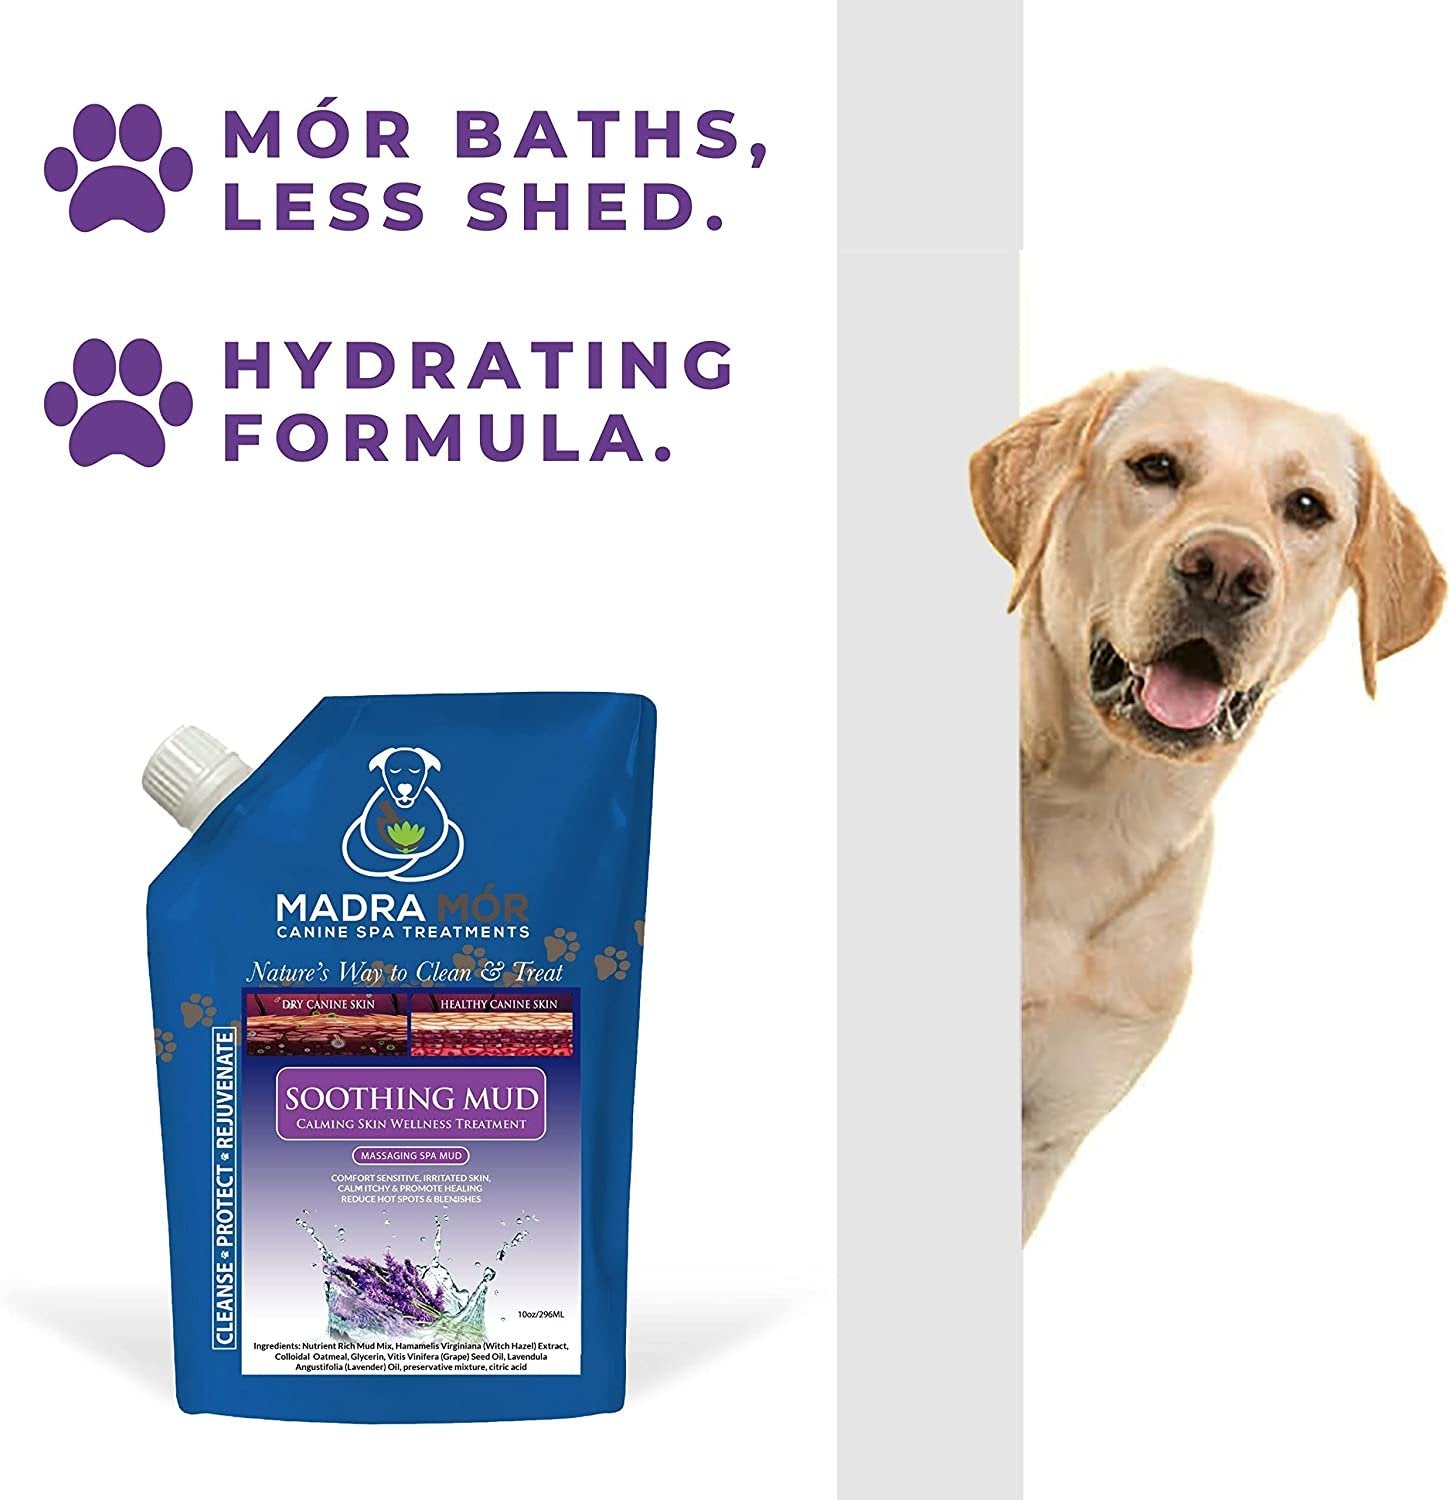 Madra Mor Massaging SPA Mud - Luxurious Dog Skin Wellness Treatment - Cleanse - Protect - Rejuvenate - Soothing Mud - 1 Pack (10oz) - with Multi-Purpose Key Chain